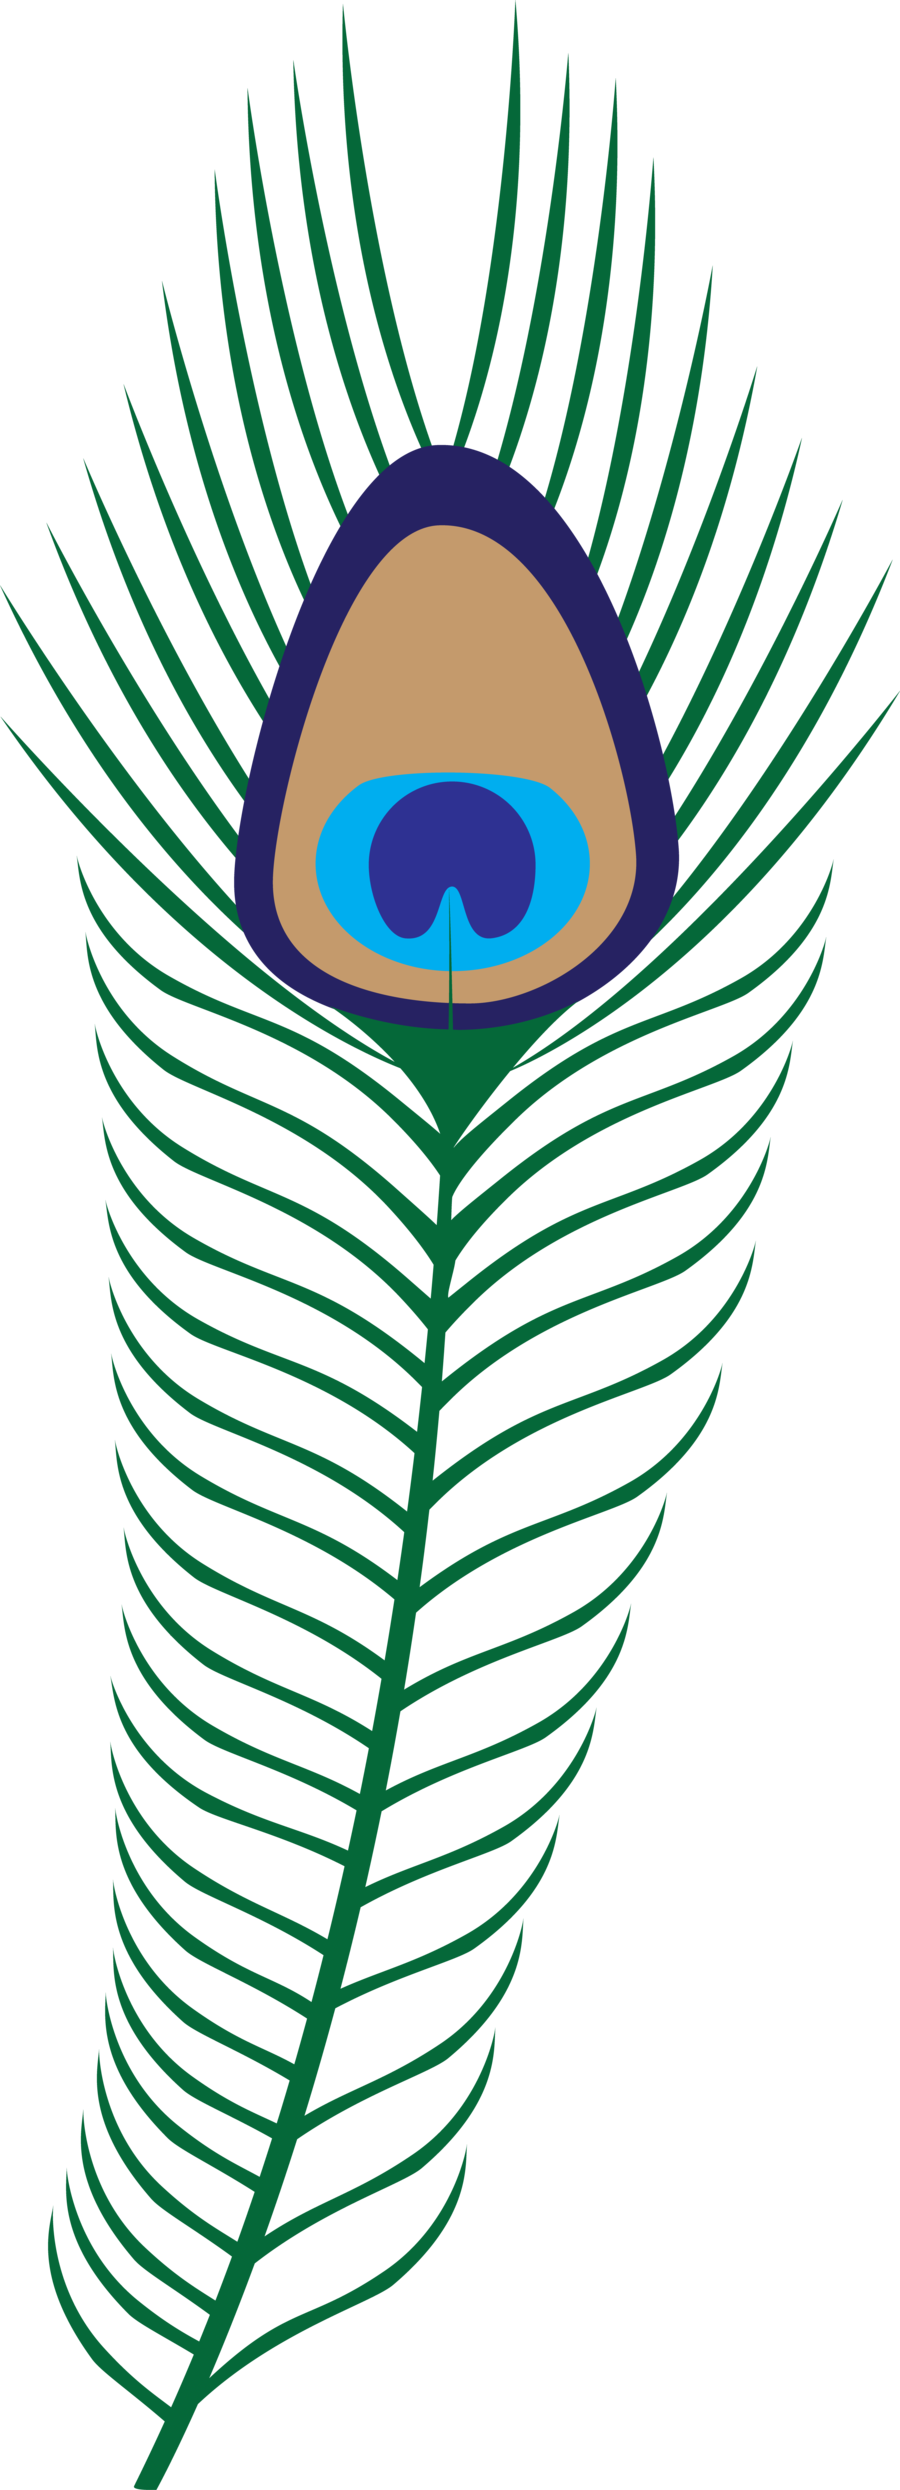 Peacock Feather | Clipart Panda - Free Clipart Images